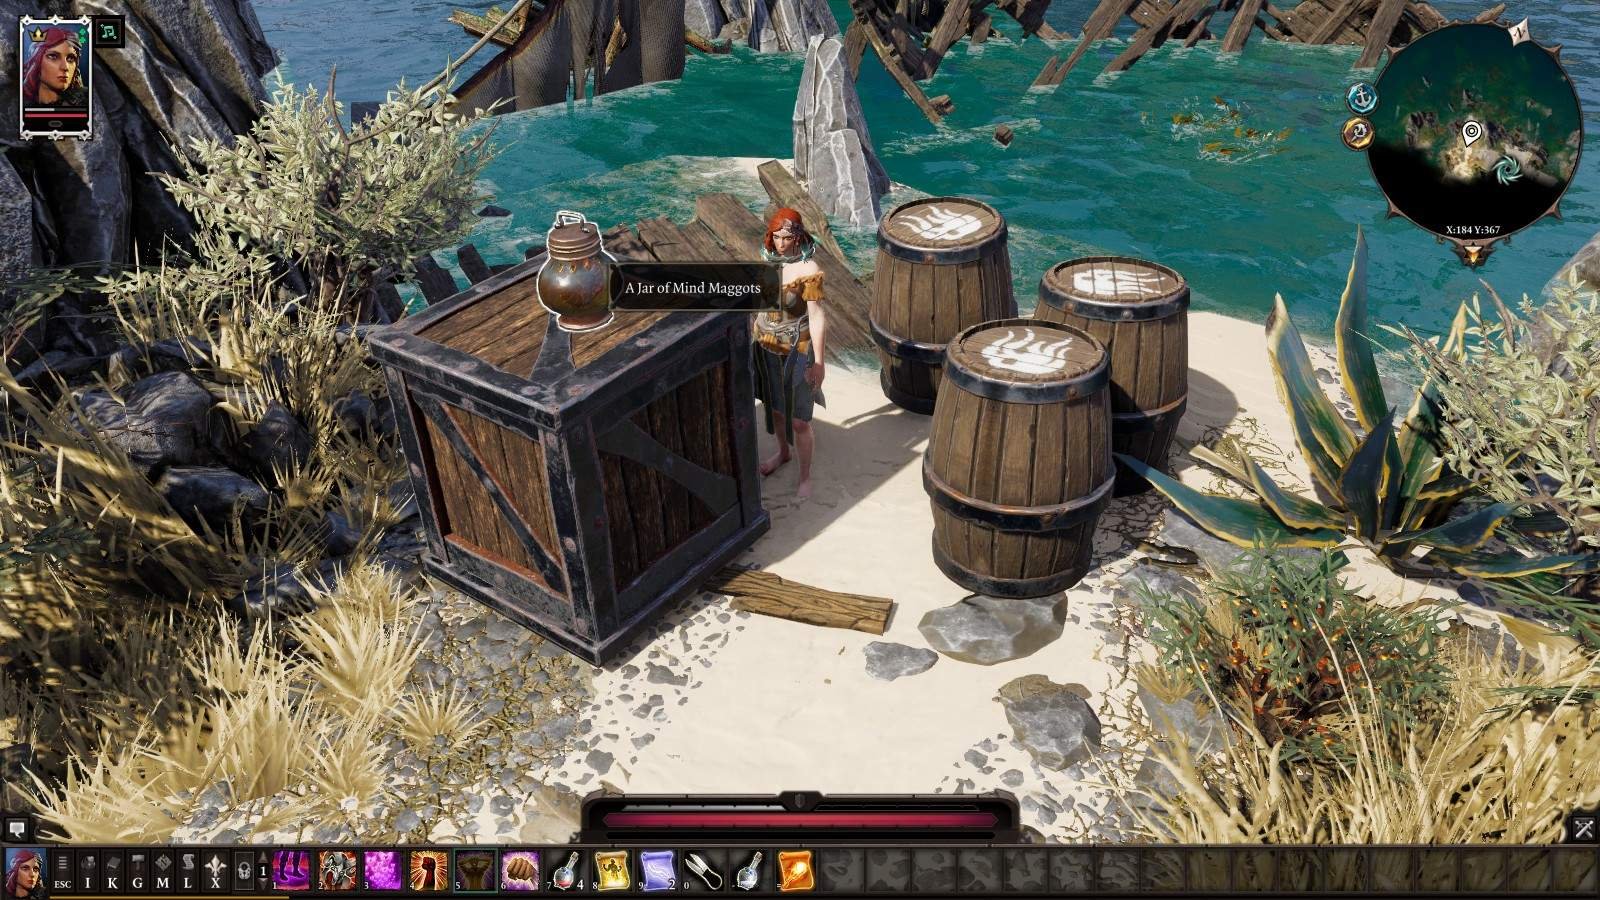 Divinity Original Sin 2 How To Take The Jar Of Mind Maggots